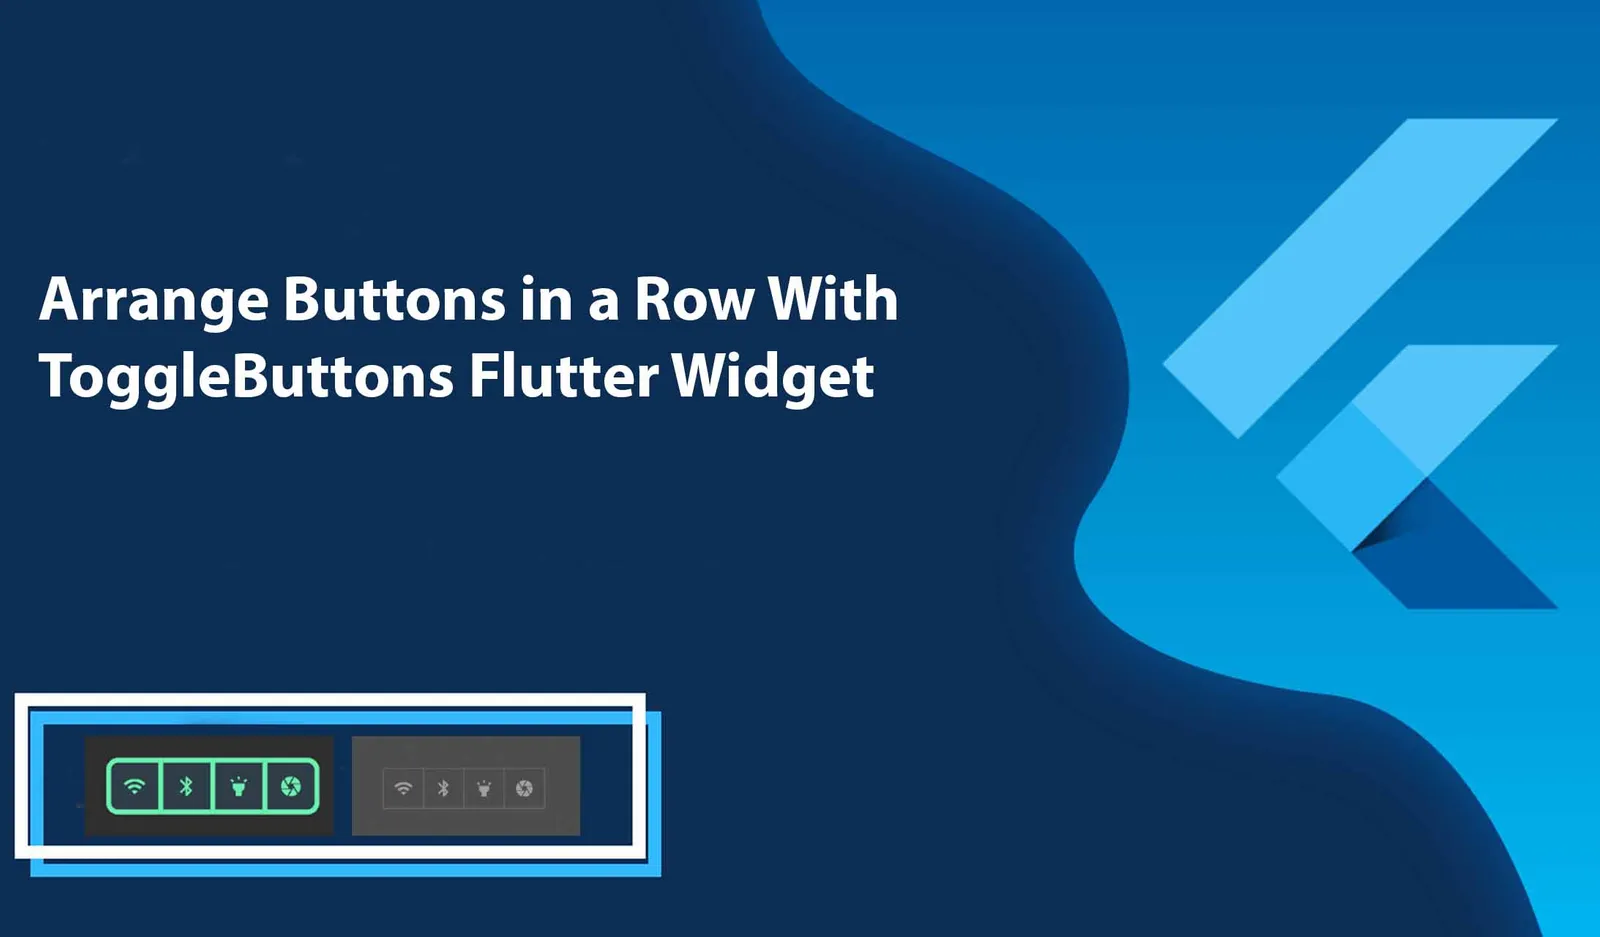 Arrange Buttons in a Row With ToggleButtons Flutter Widget